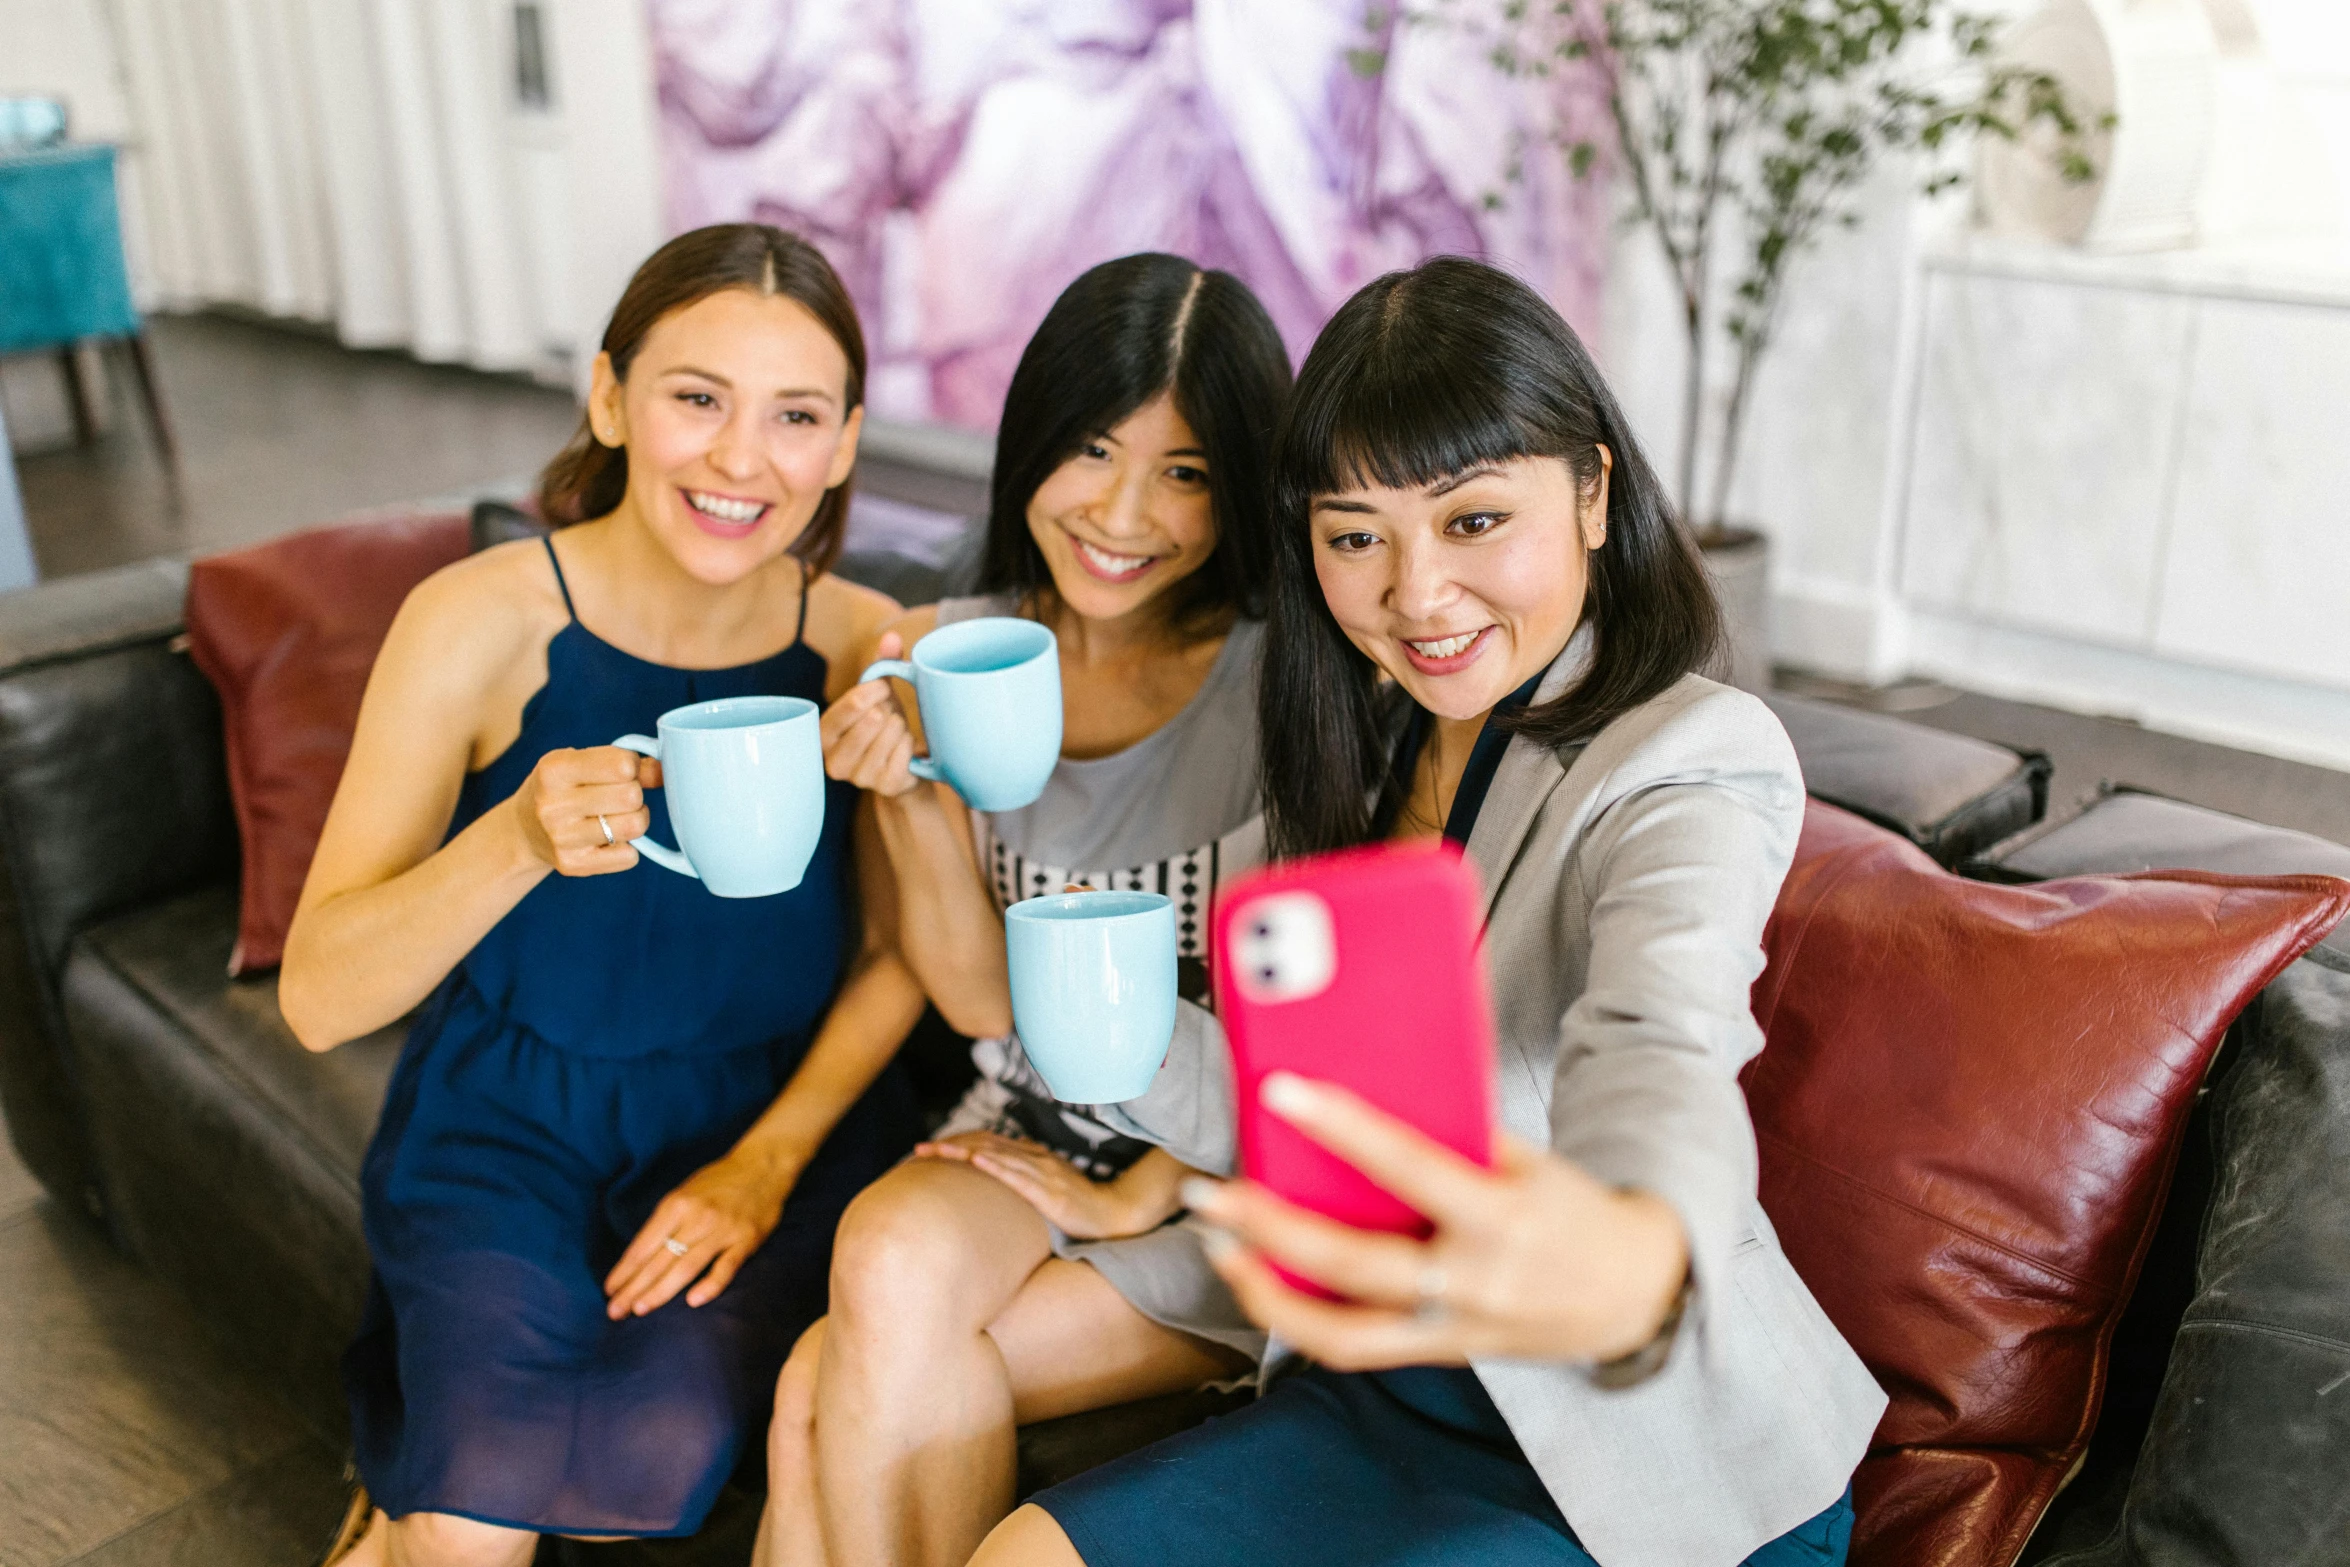 three women sitting on a couch holding coffee mugs, pexels contest winner, chinese woman, instagram selfie, pink and blue colour, aussie baristas